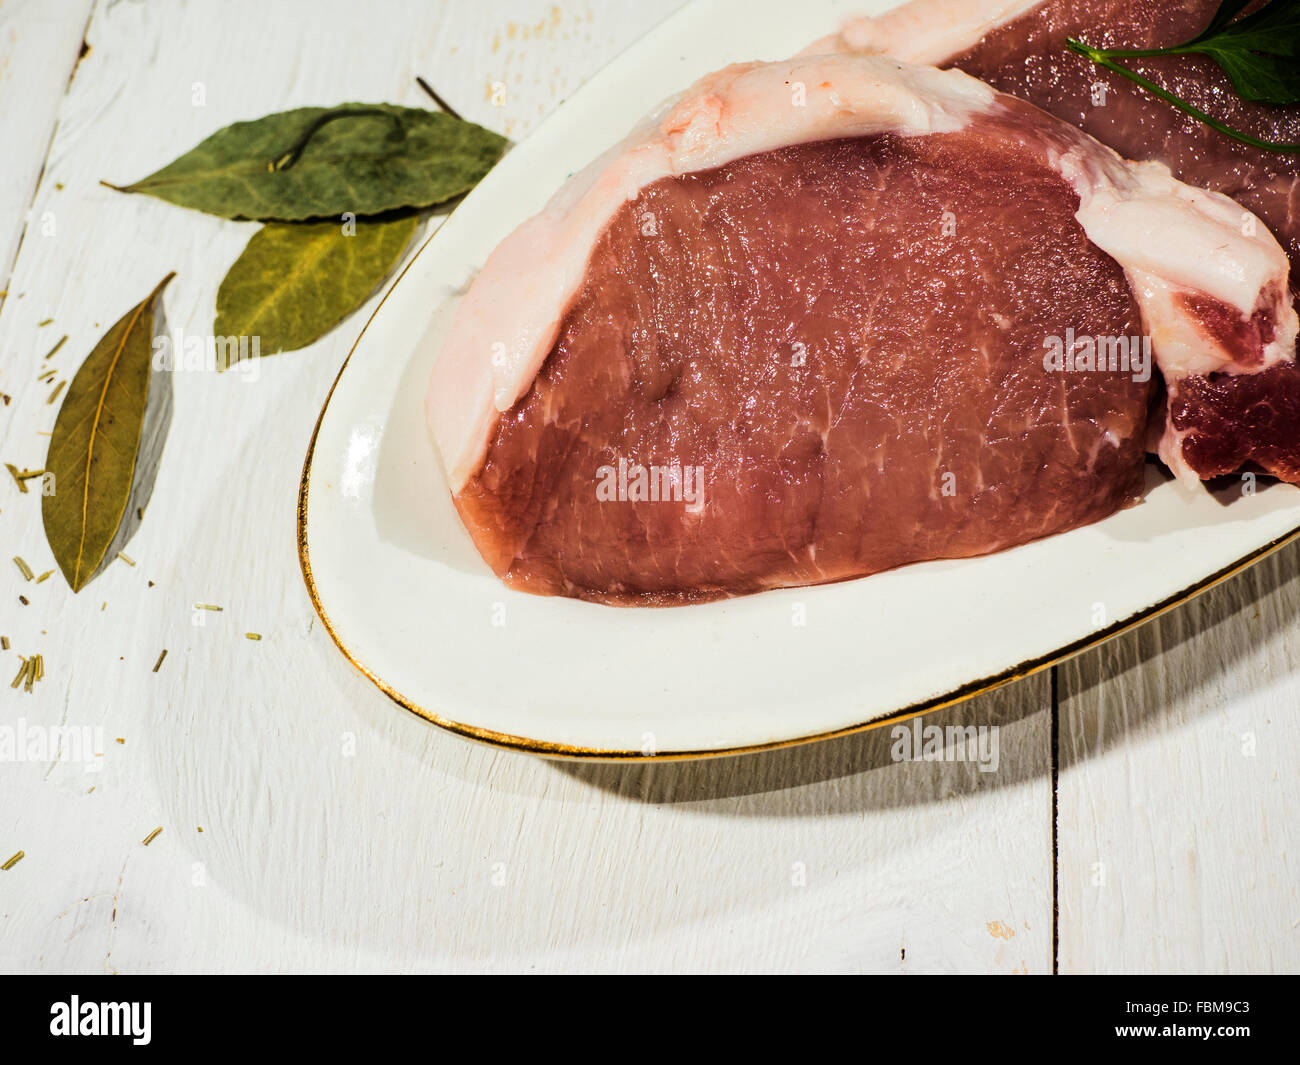 Raw pork chops on a plate Stock Photo